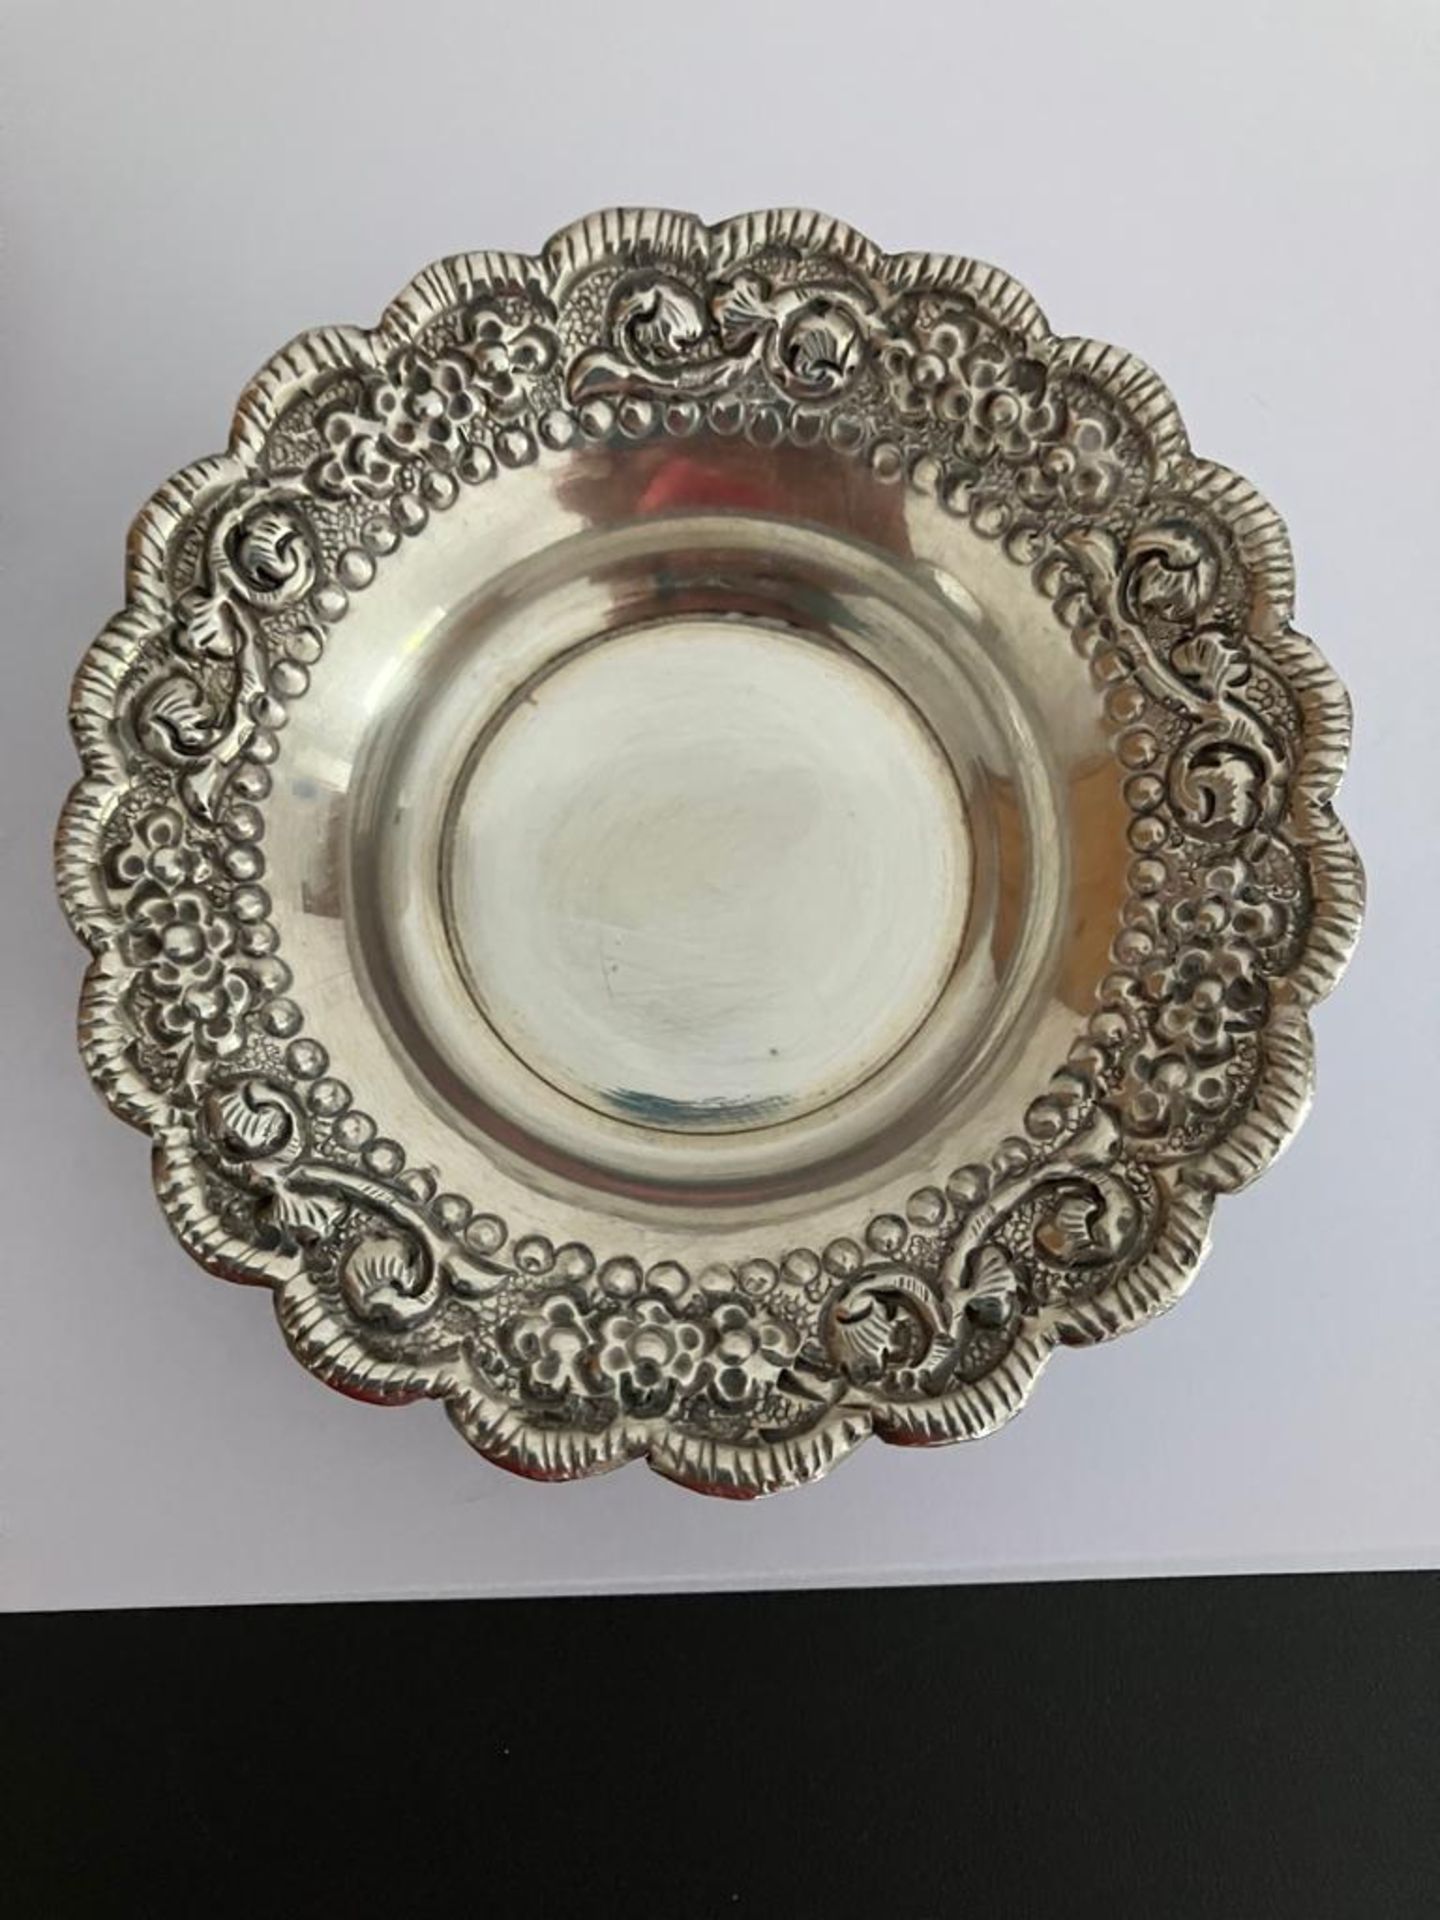 Beautiful pair of PERSIAN SILVER BON BON DISHES. Having intricate design crafted in repousse form. - Bild 3 aus 5